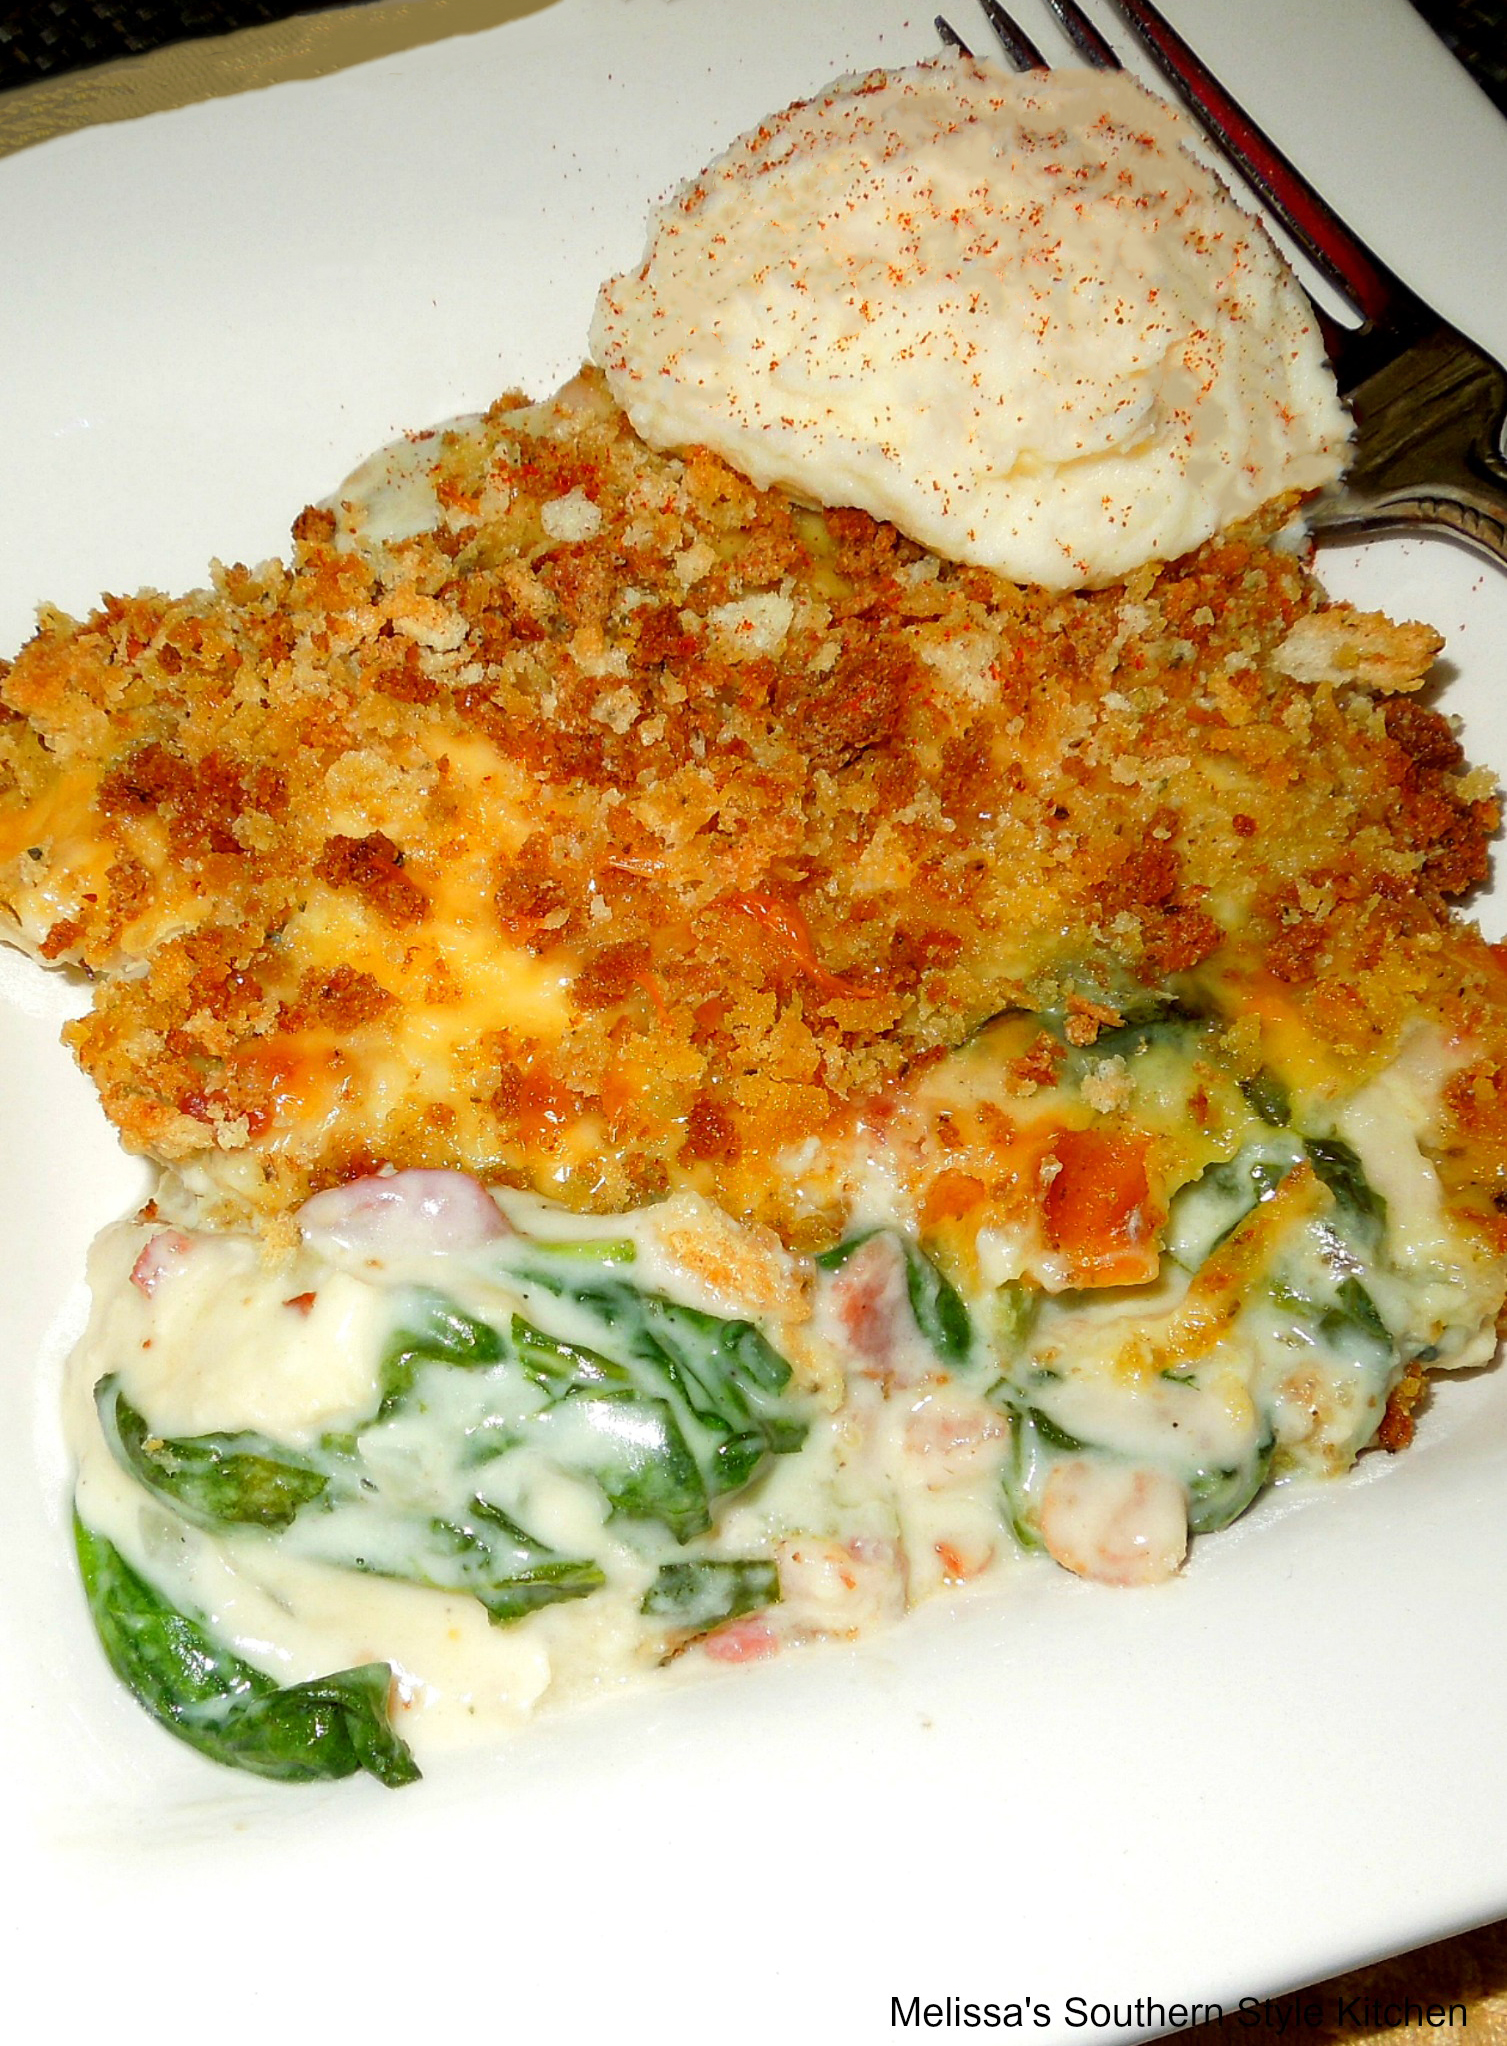 Turkey casserole on a plate with mashed potatoes